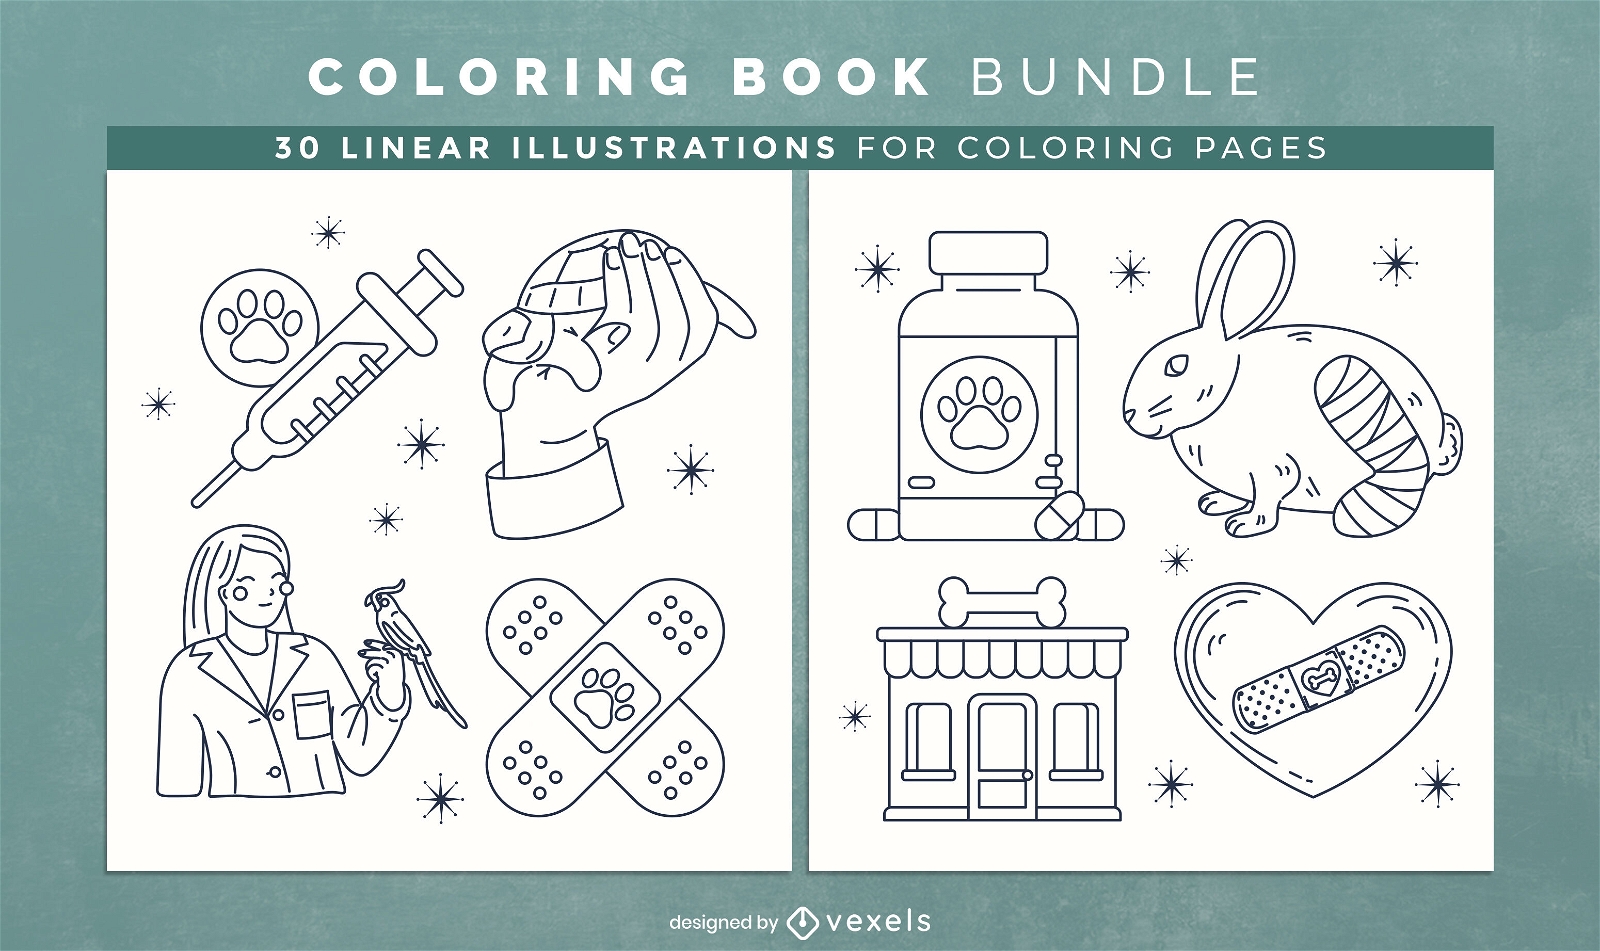 Veterinarian coloring book pages design